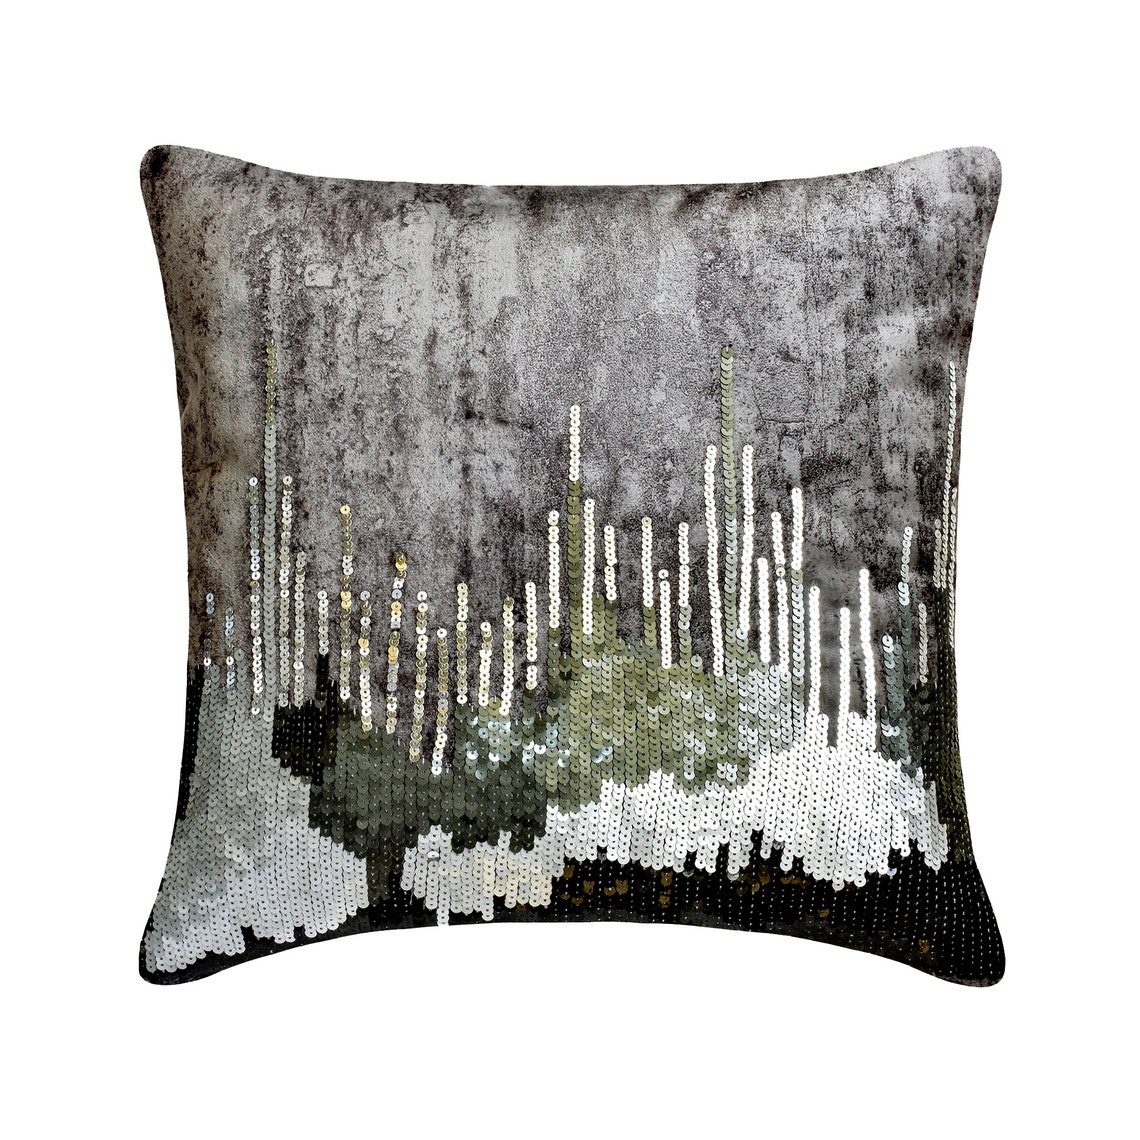 Throw Pillow Cover With Zipper, Grey 20"x20" (50x50 cm) Throw Pillows, Velvet Sequins, Ombre & Foil Throw Pillows For Couch, Ombre Pattern Modern Style Halloween Decorations - Exodus - image 1 of 3